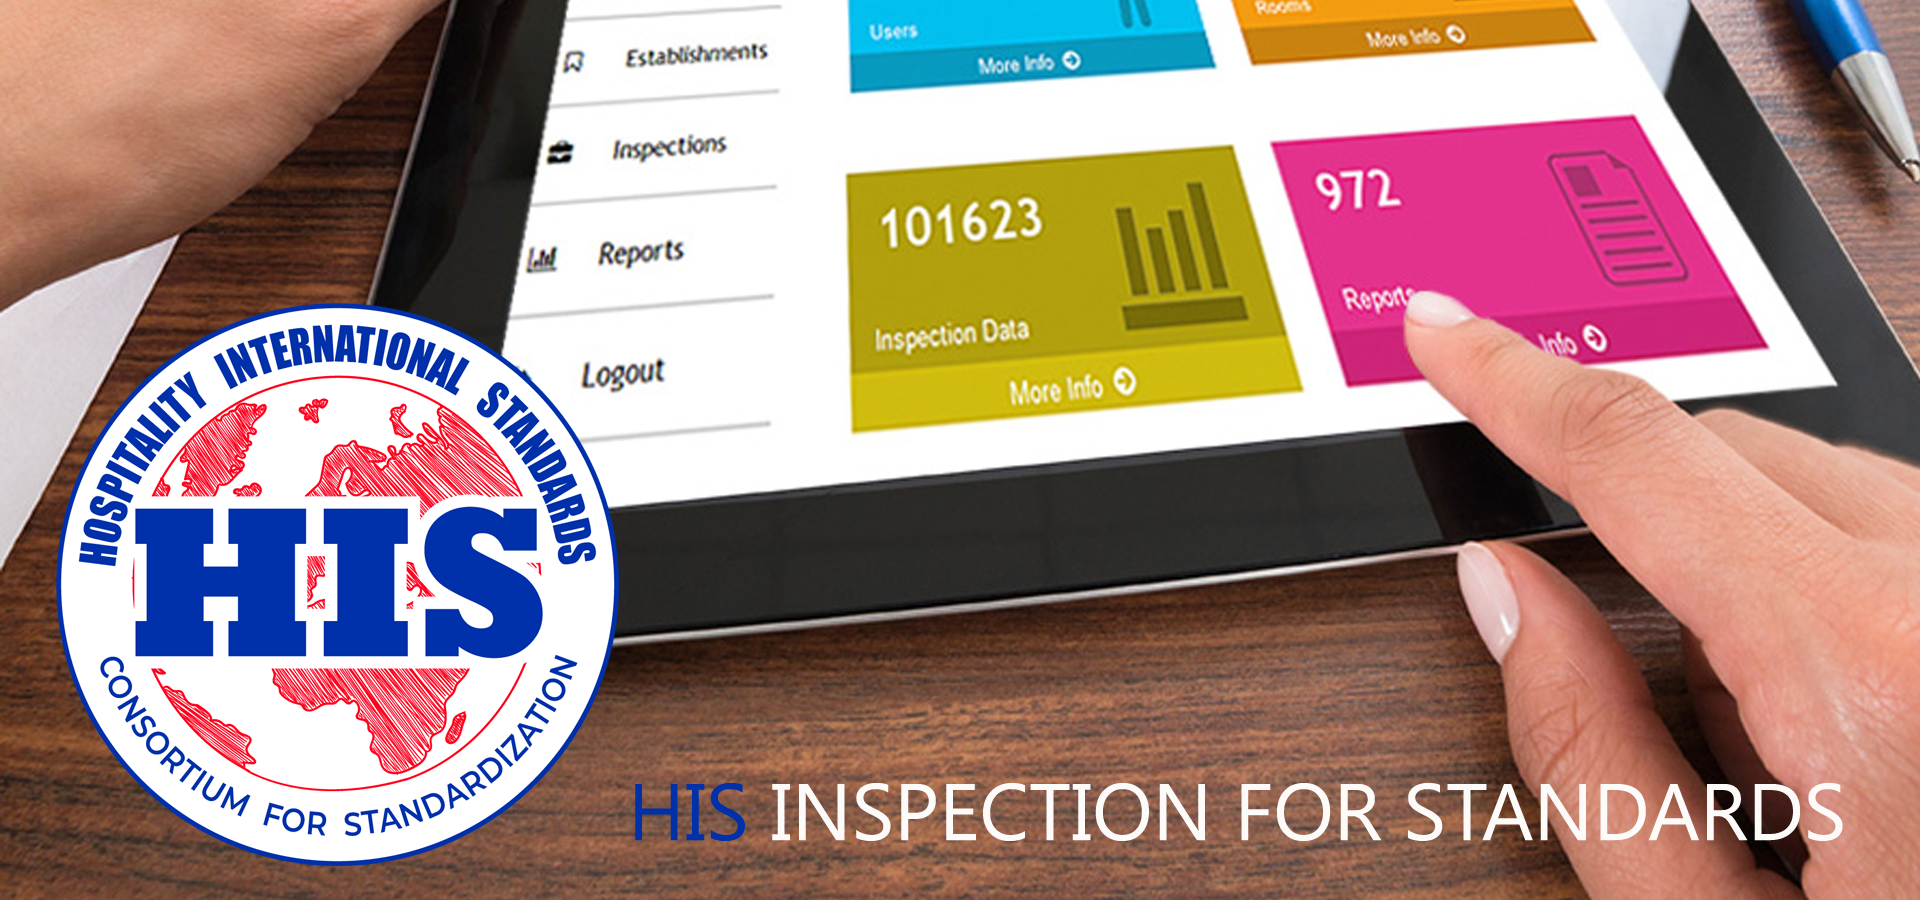 hospitality standards and inspection